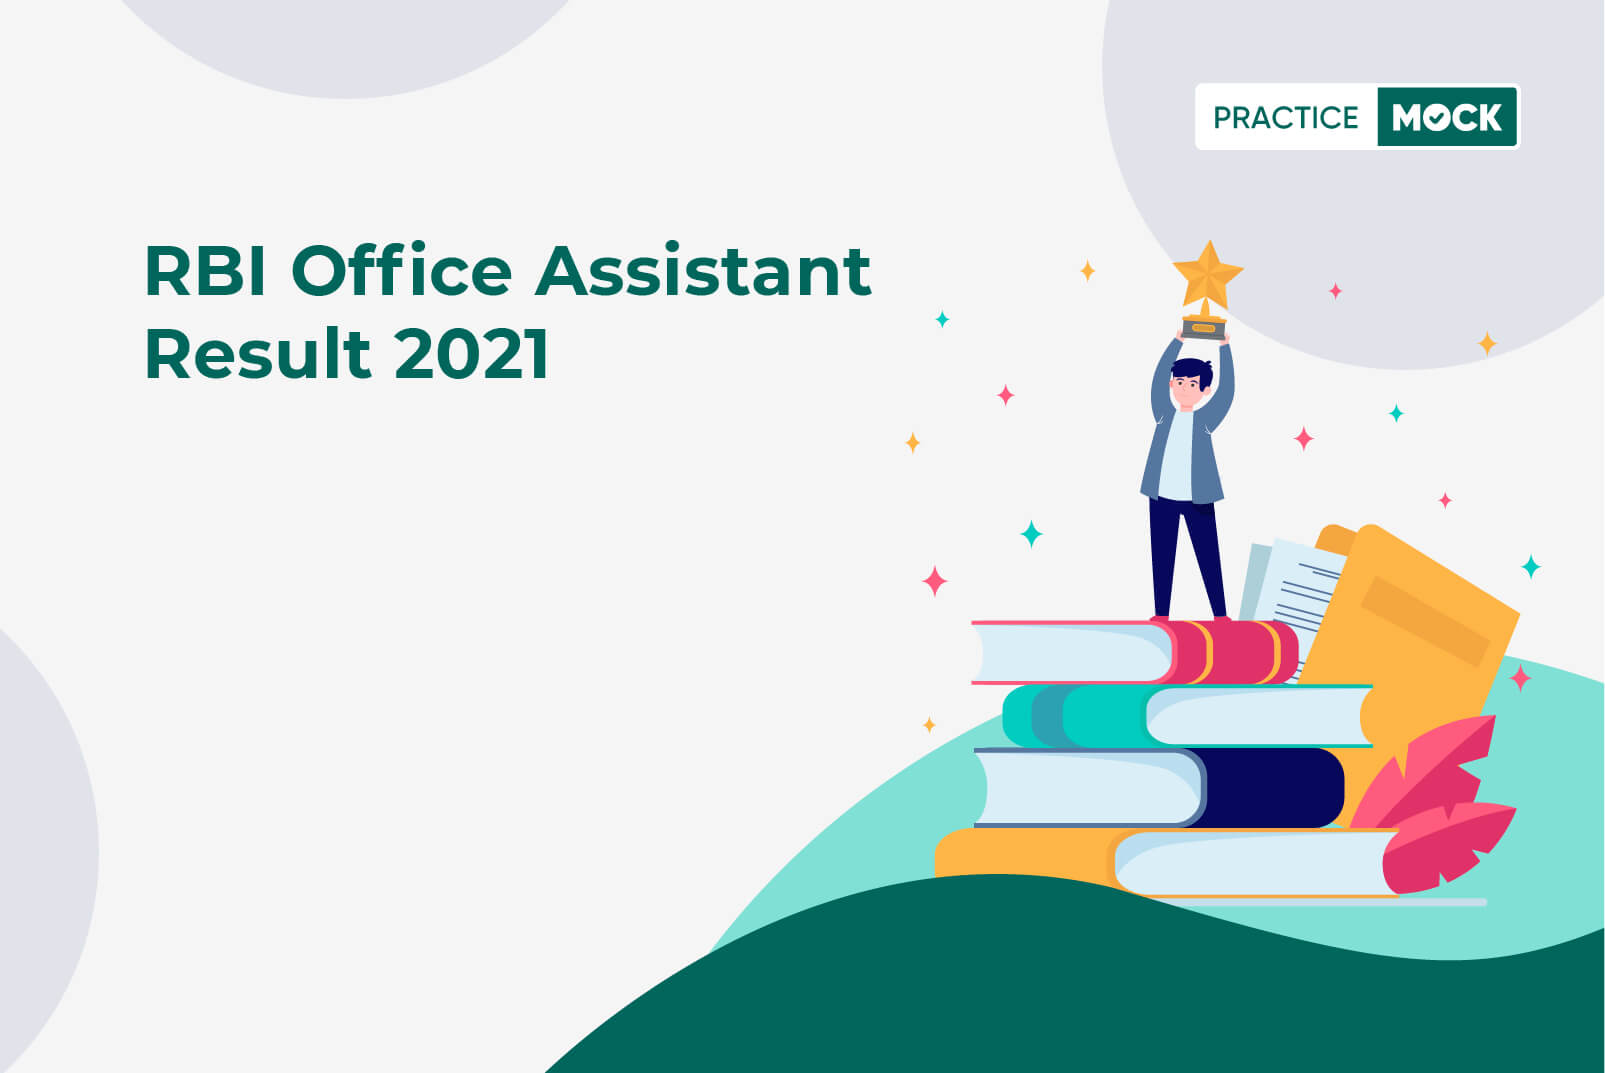 RBI Office Assistant Result 2021